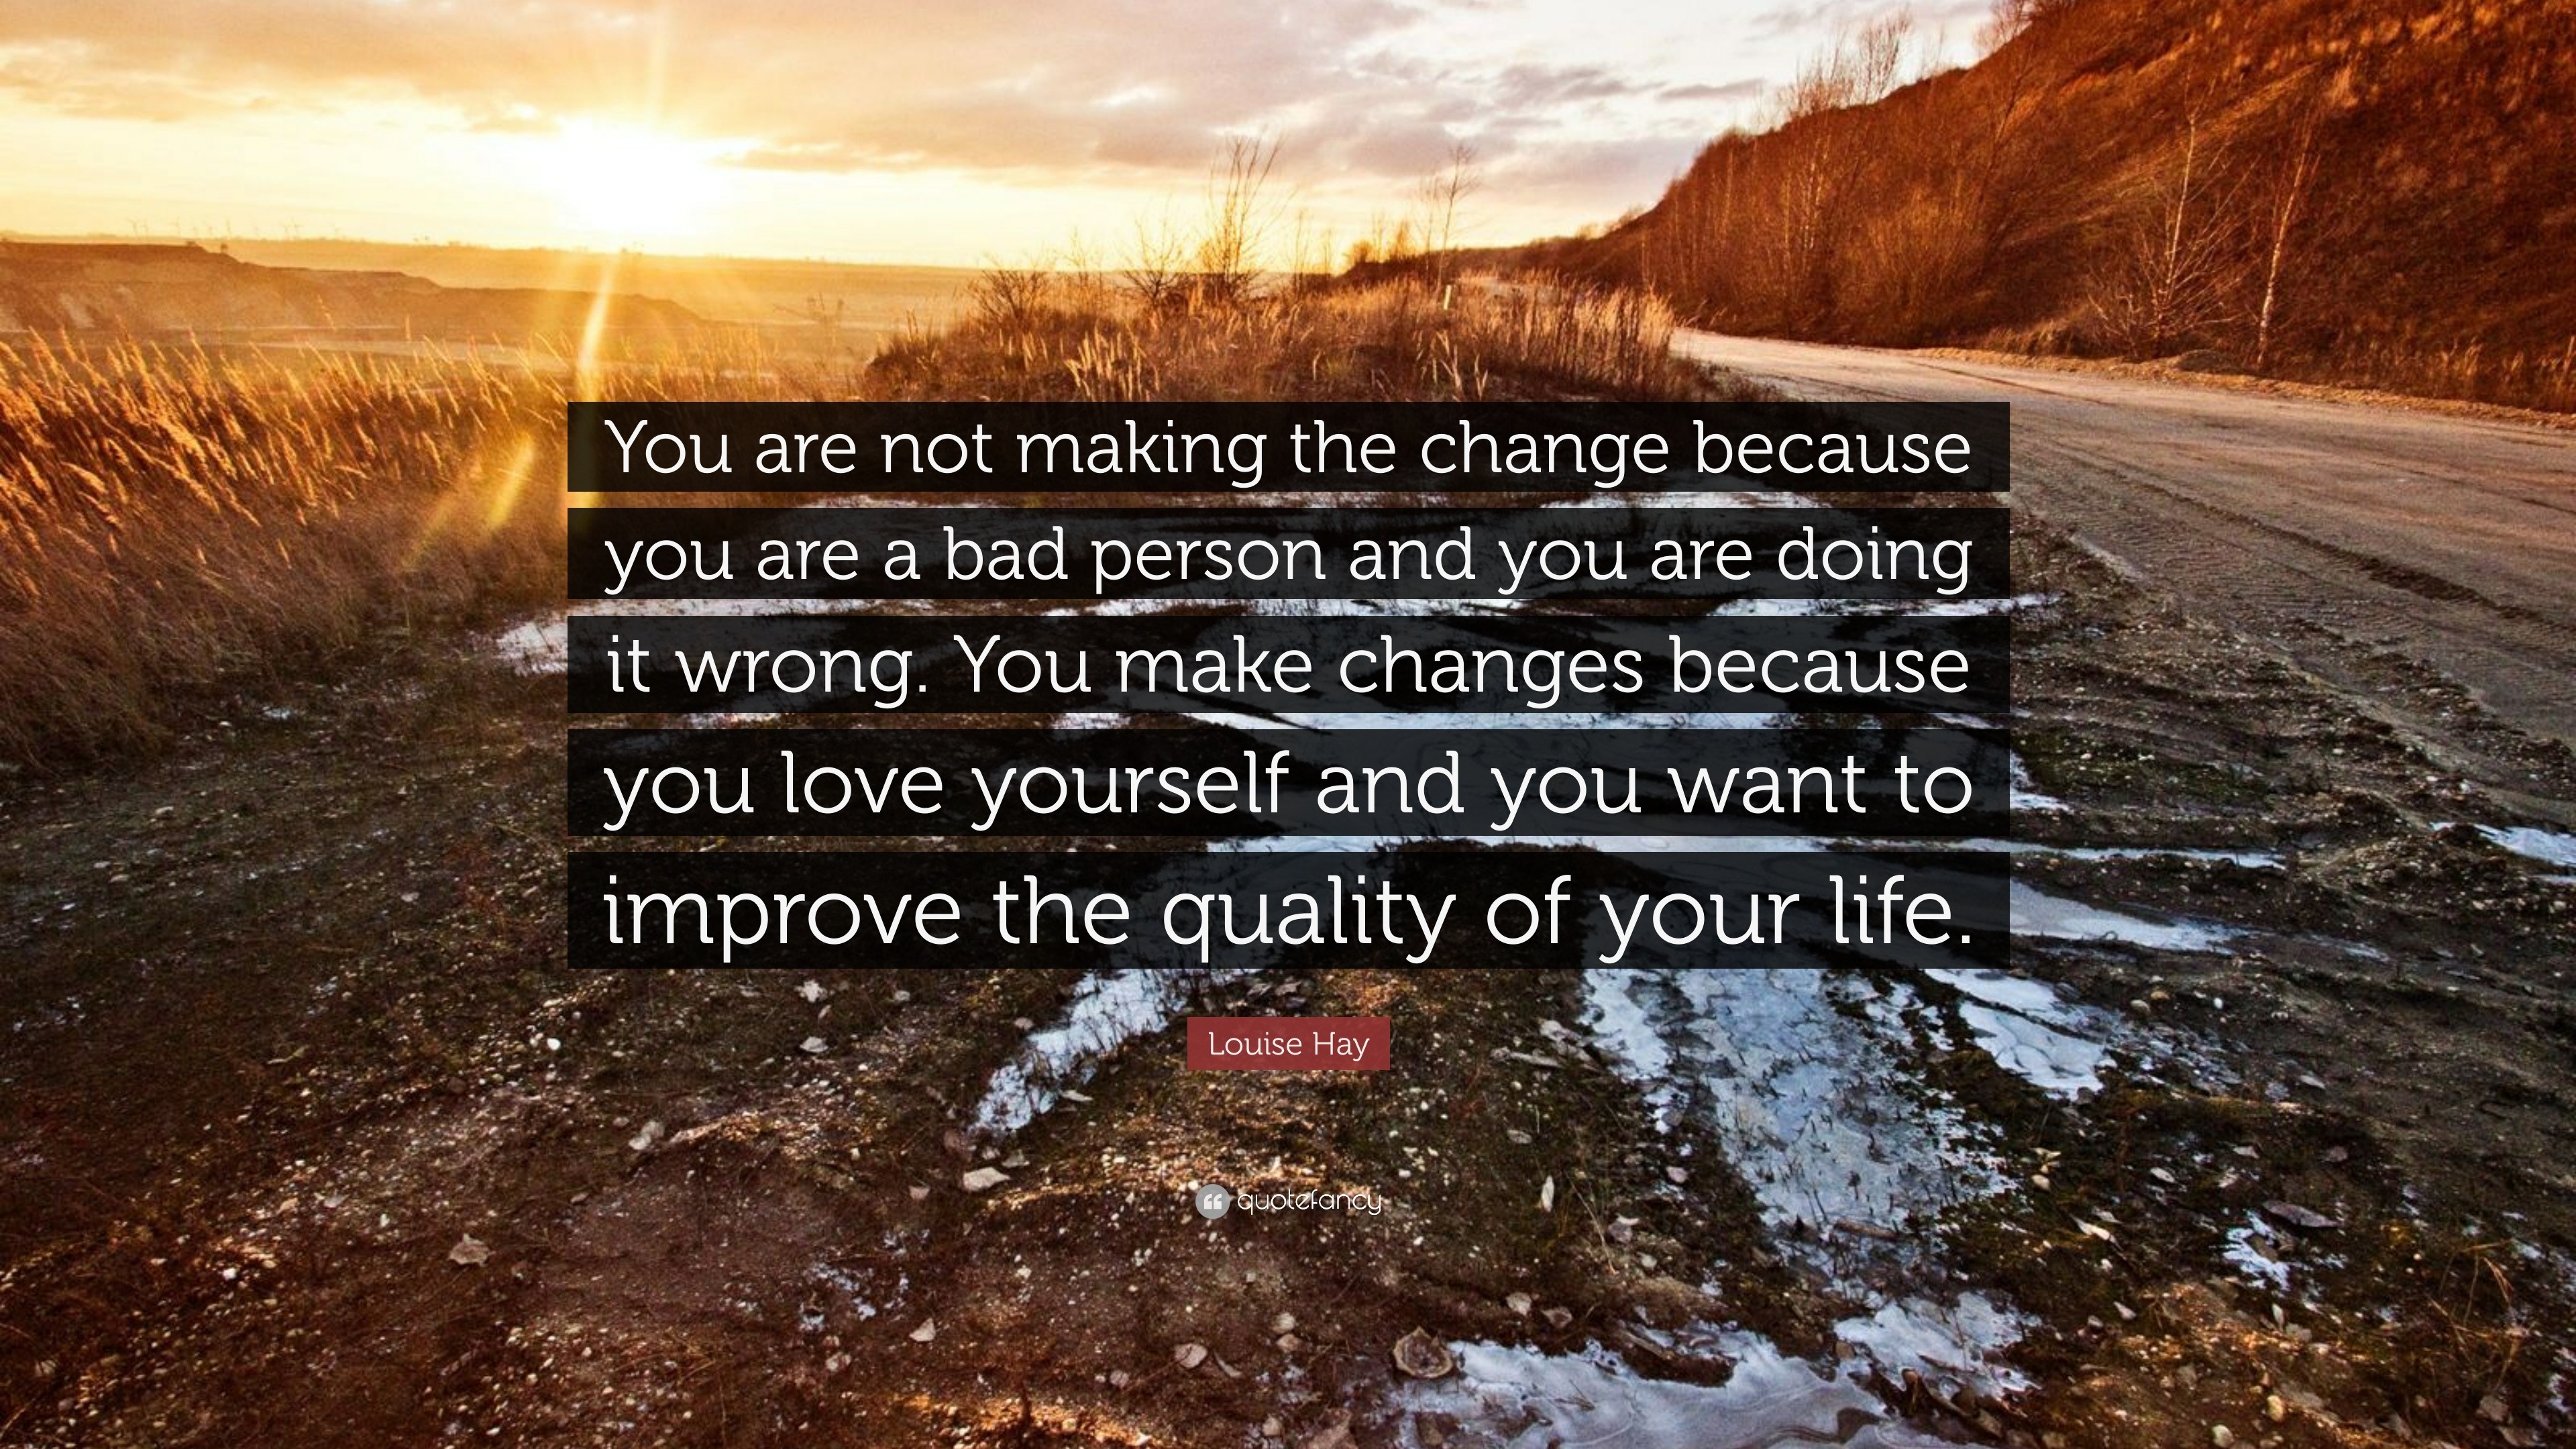 Louise Hay Quote “You are not making the change because you are a bad